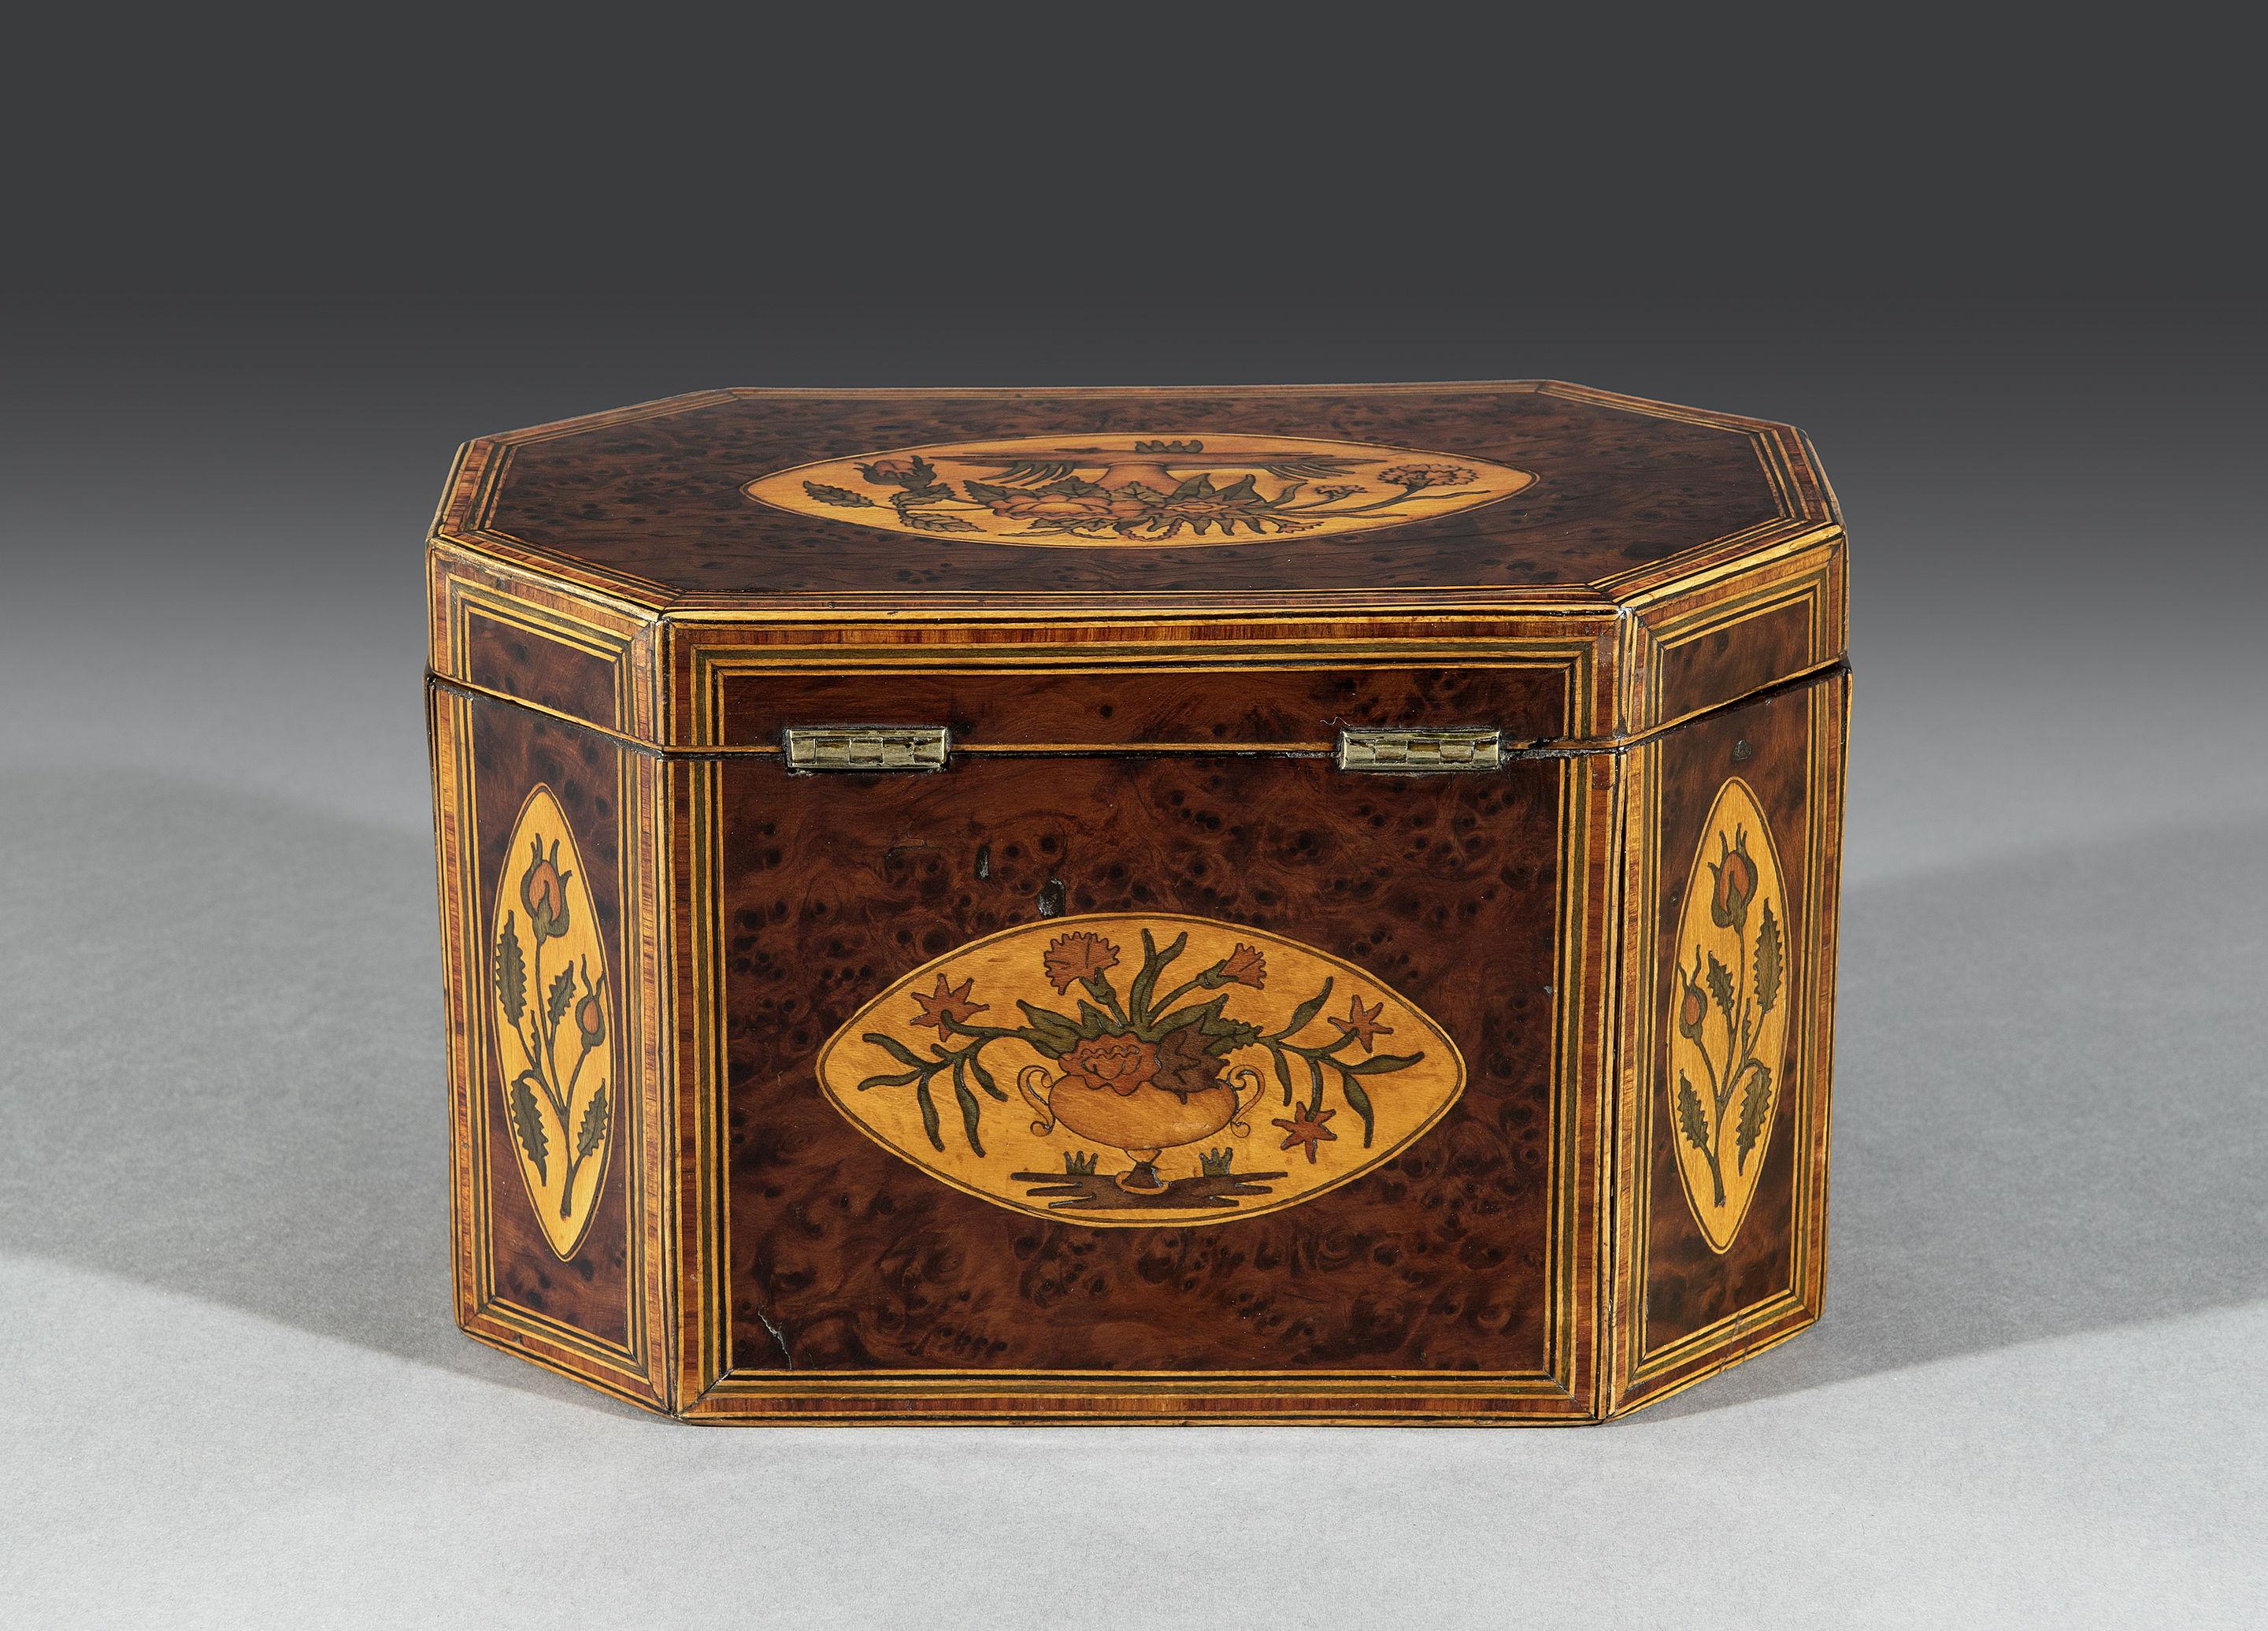 English Late George III Period Burr Yew Inlaid Floral Marquetry Octagonal Tea Caddy For Sale